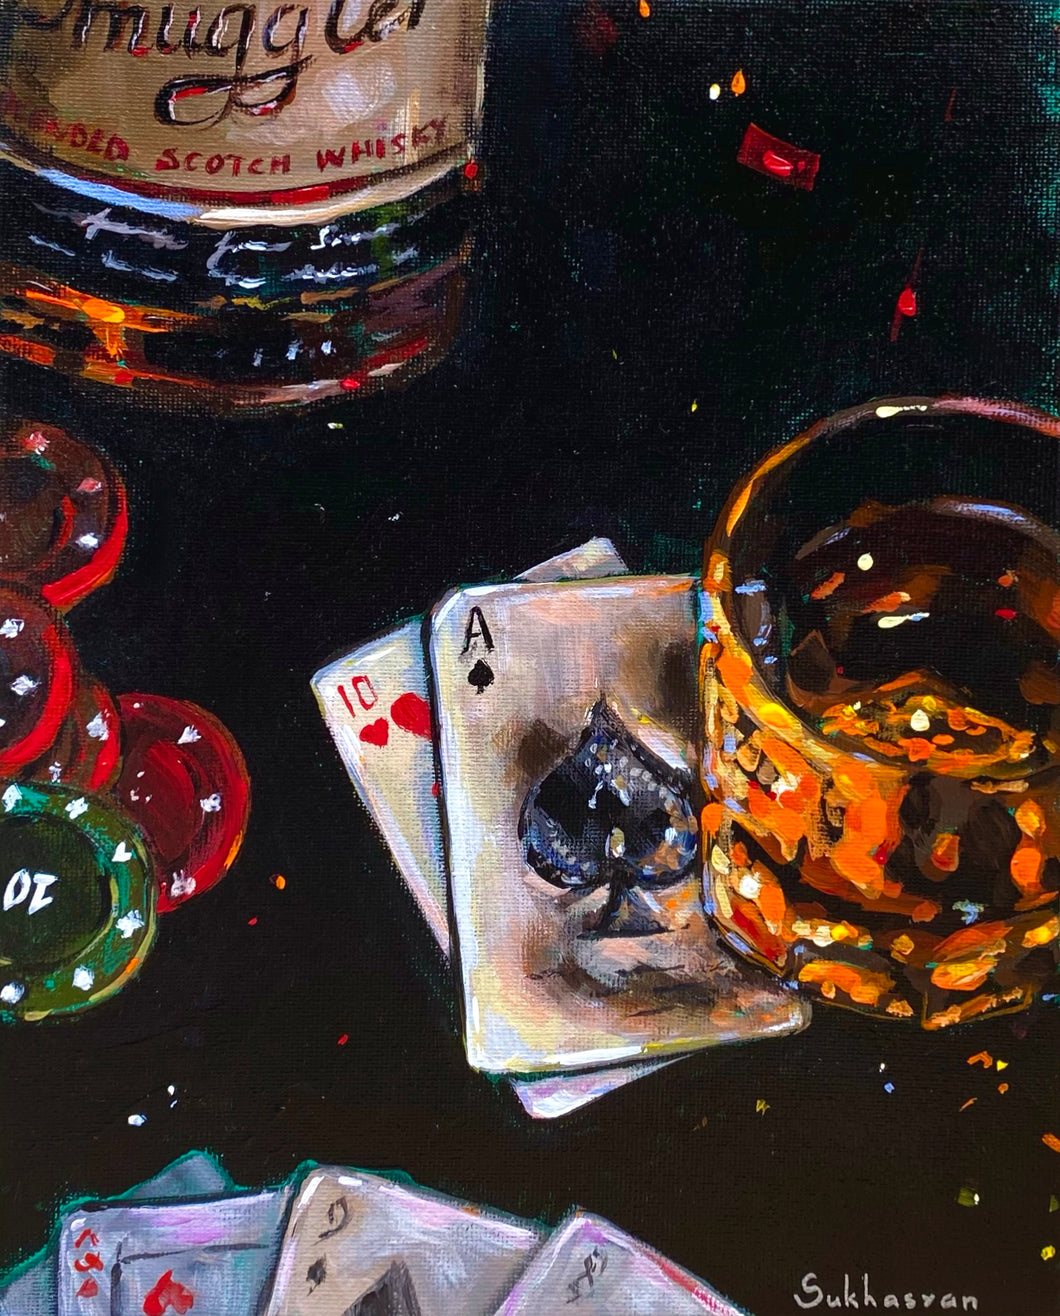 Archival giclée print of the of Original acrylic painting Poker and Whiskey still life by Sukhasyan.